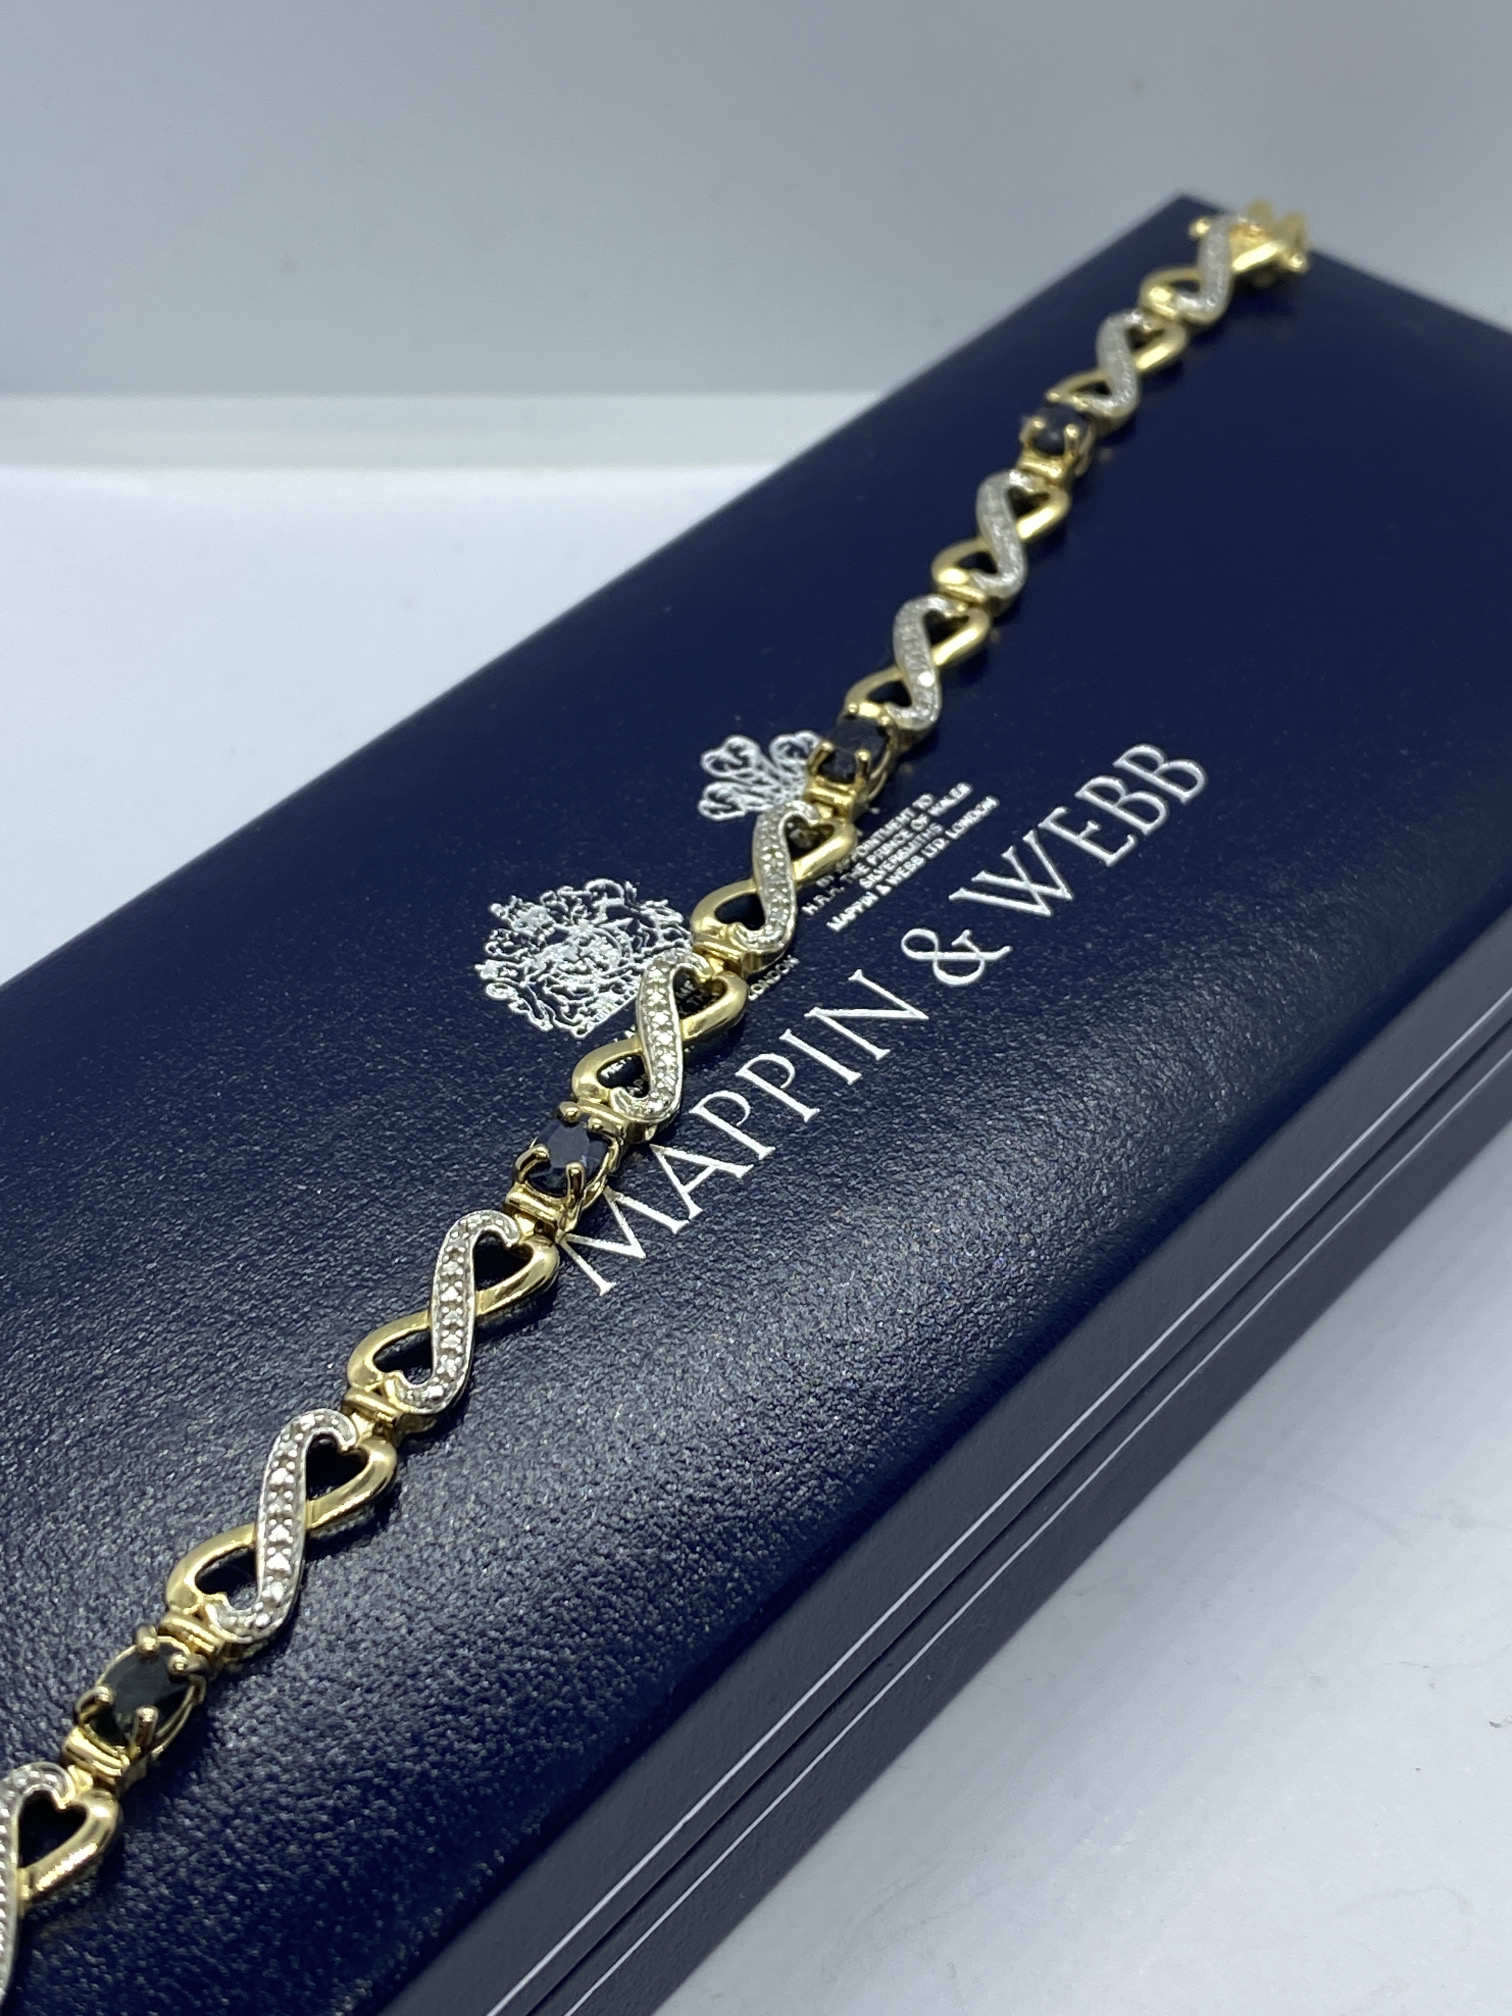 APPROX. 2.50ct BLUE SAPPHIRE AND DIAMOND SET BRACELET IN GOLD VERMEIL APPROX. 7.5' - Image 3 of 3